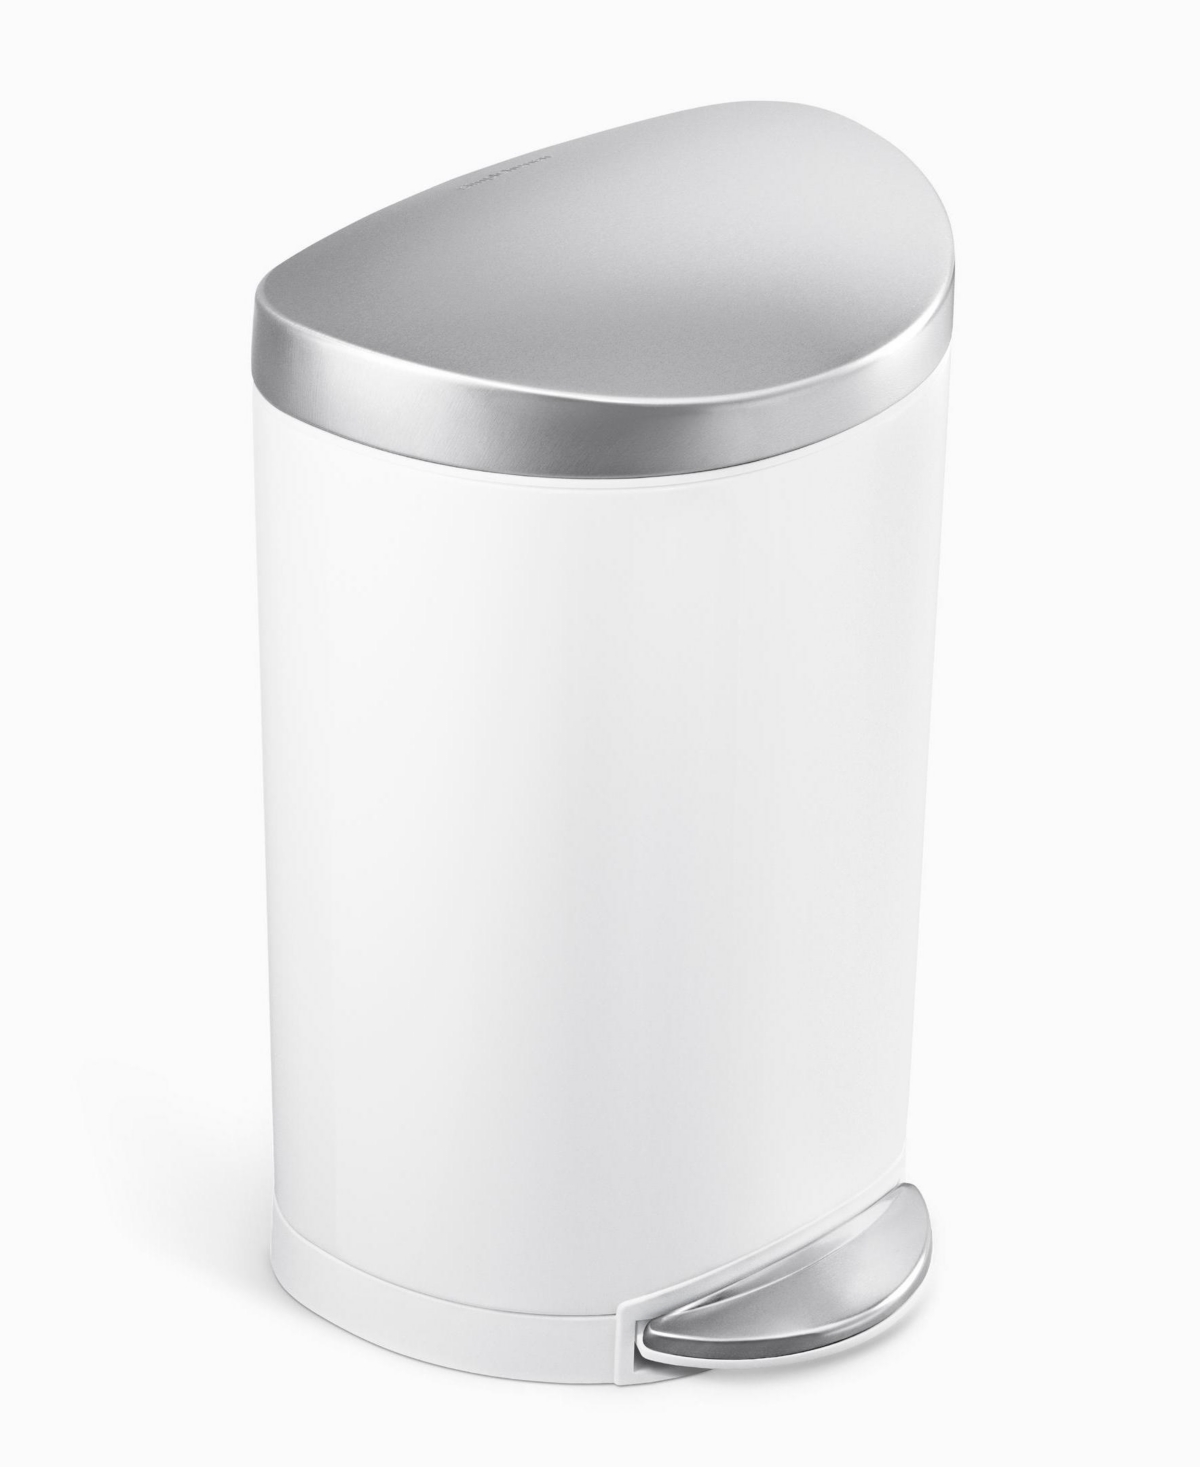 Simplehuman 10 Litre Steel Semi-round Step Can In White Stainless Steel